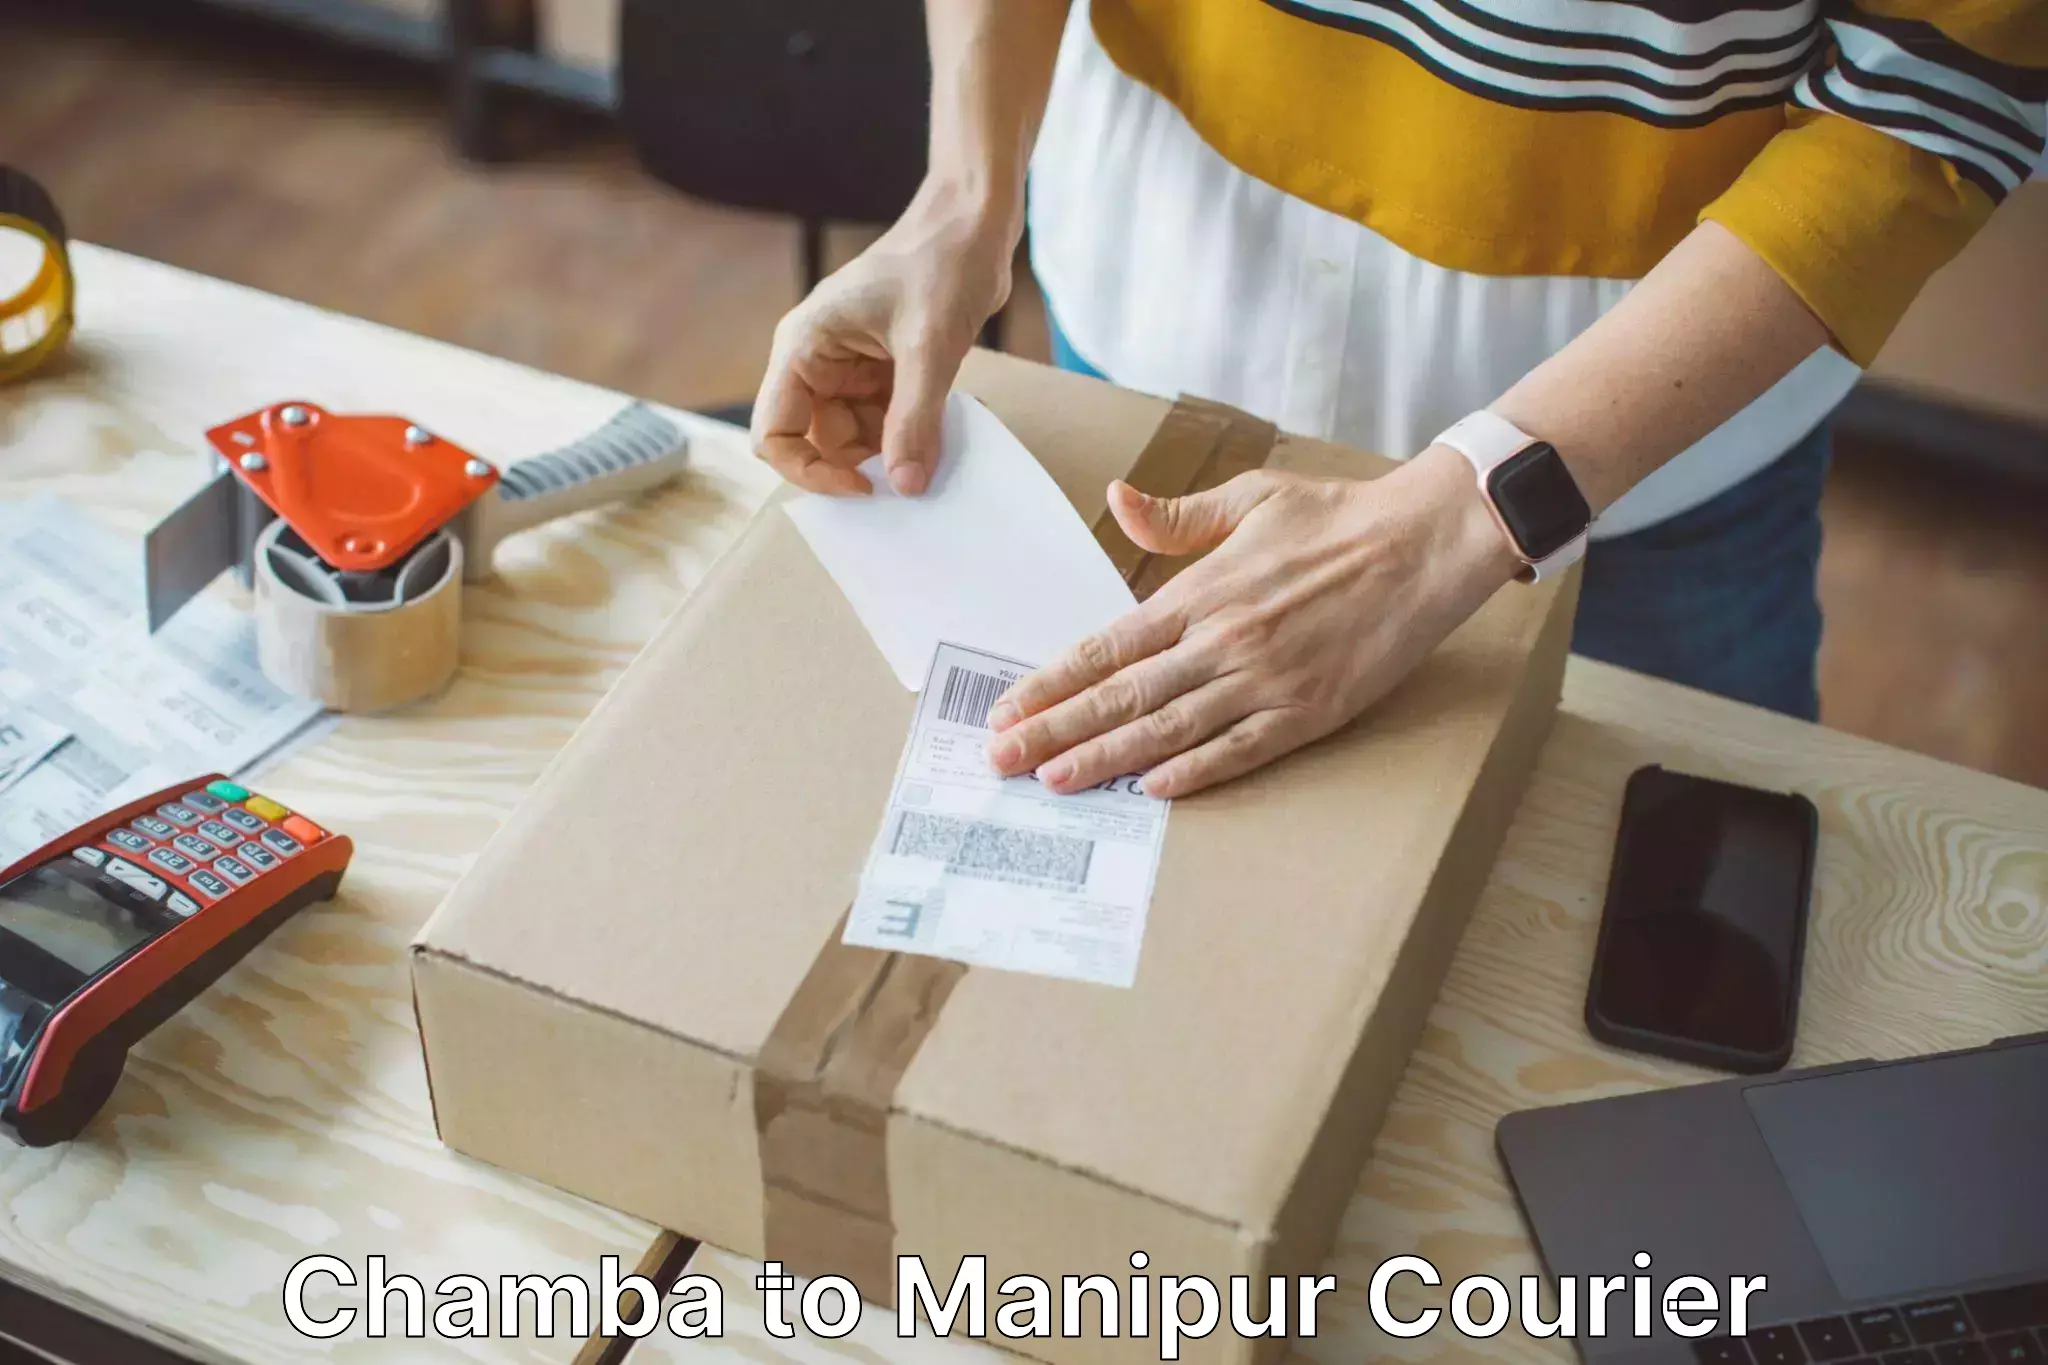 Personal effects shipping in Chamba to Manipur